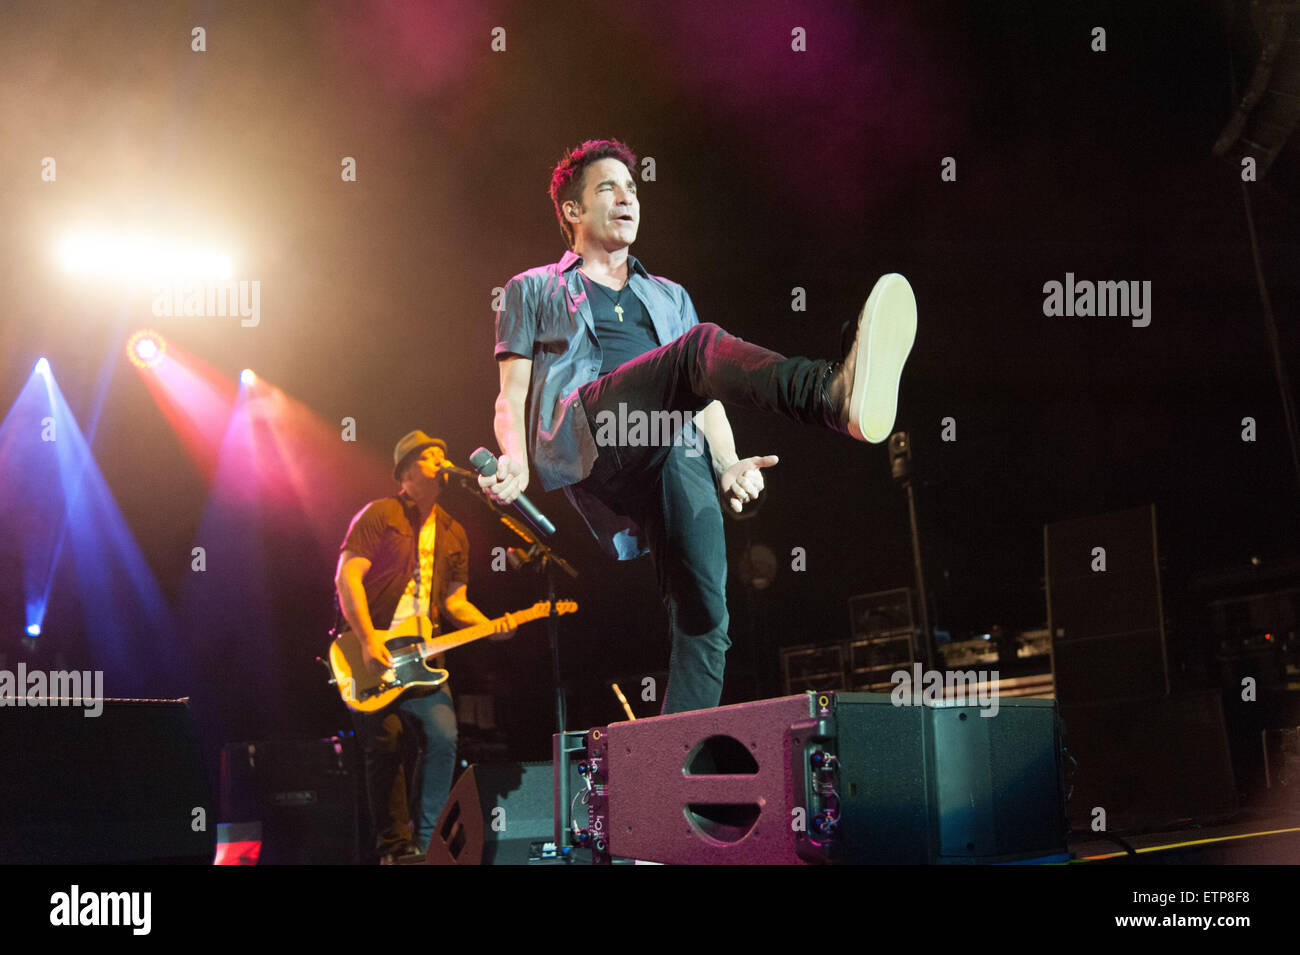 Camden, New Jersey, USA. 14th June, 2015. PAT MONAHAN, lead singer of the band TRAIN, performing at the Susquehanna Bank Center as part of the Picasso at the Wheel Tour Credit:  Ricky Fitchett/ZUMA Wire/Alamy Live News Stock Photo